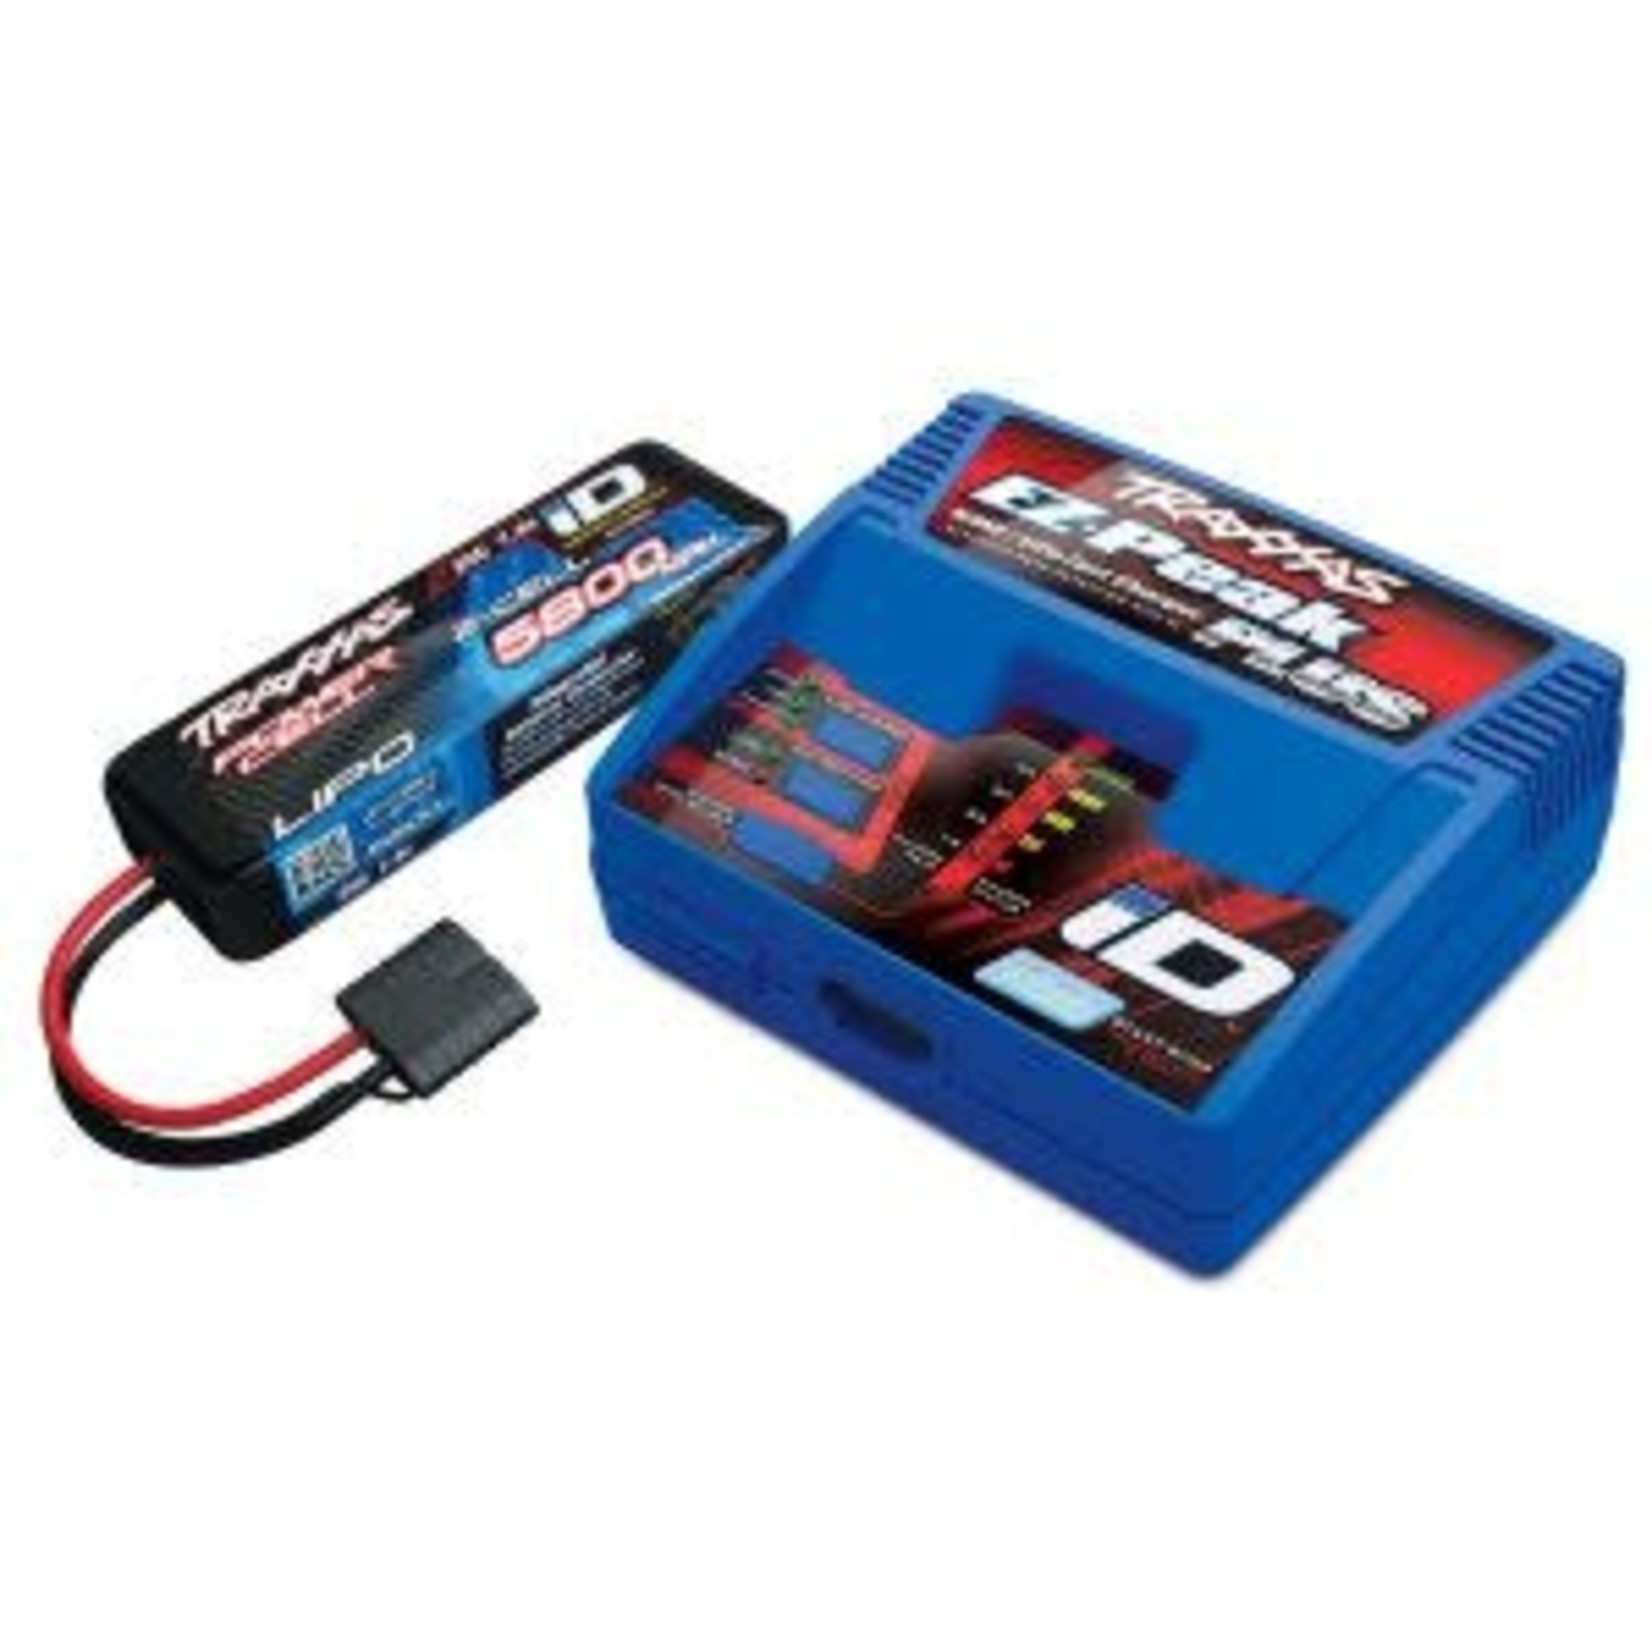 Traxxas 2992 2S LIPO COMPLETER 2843X/2970